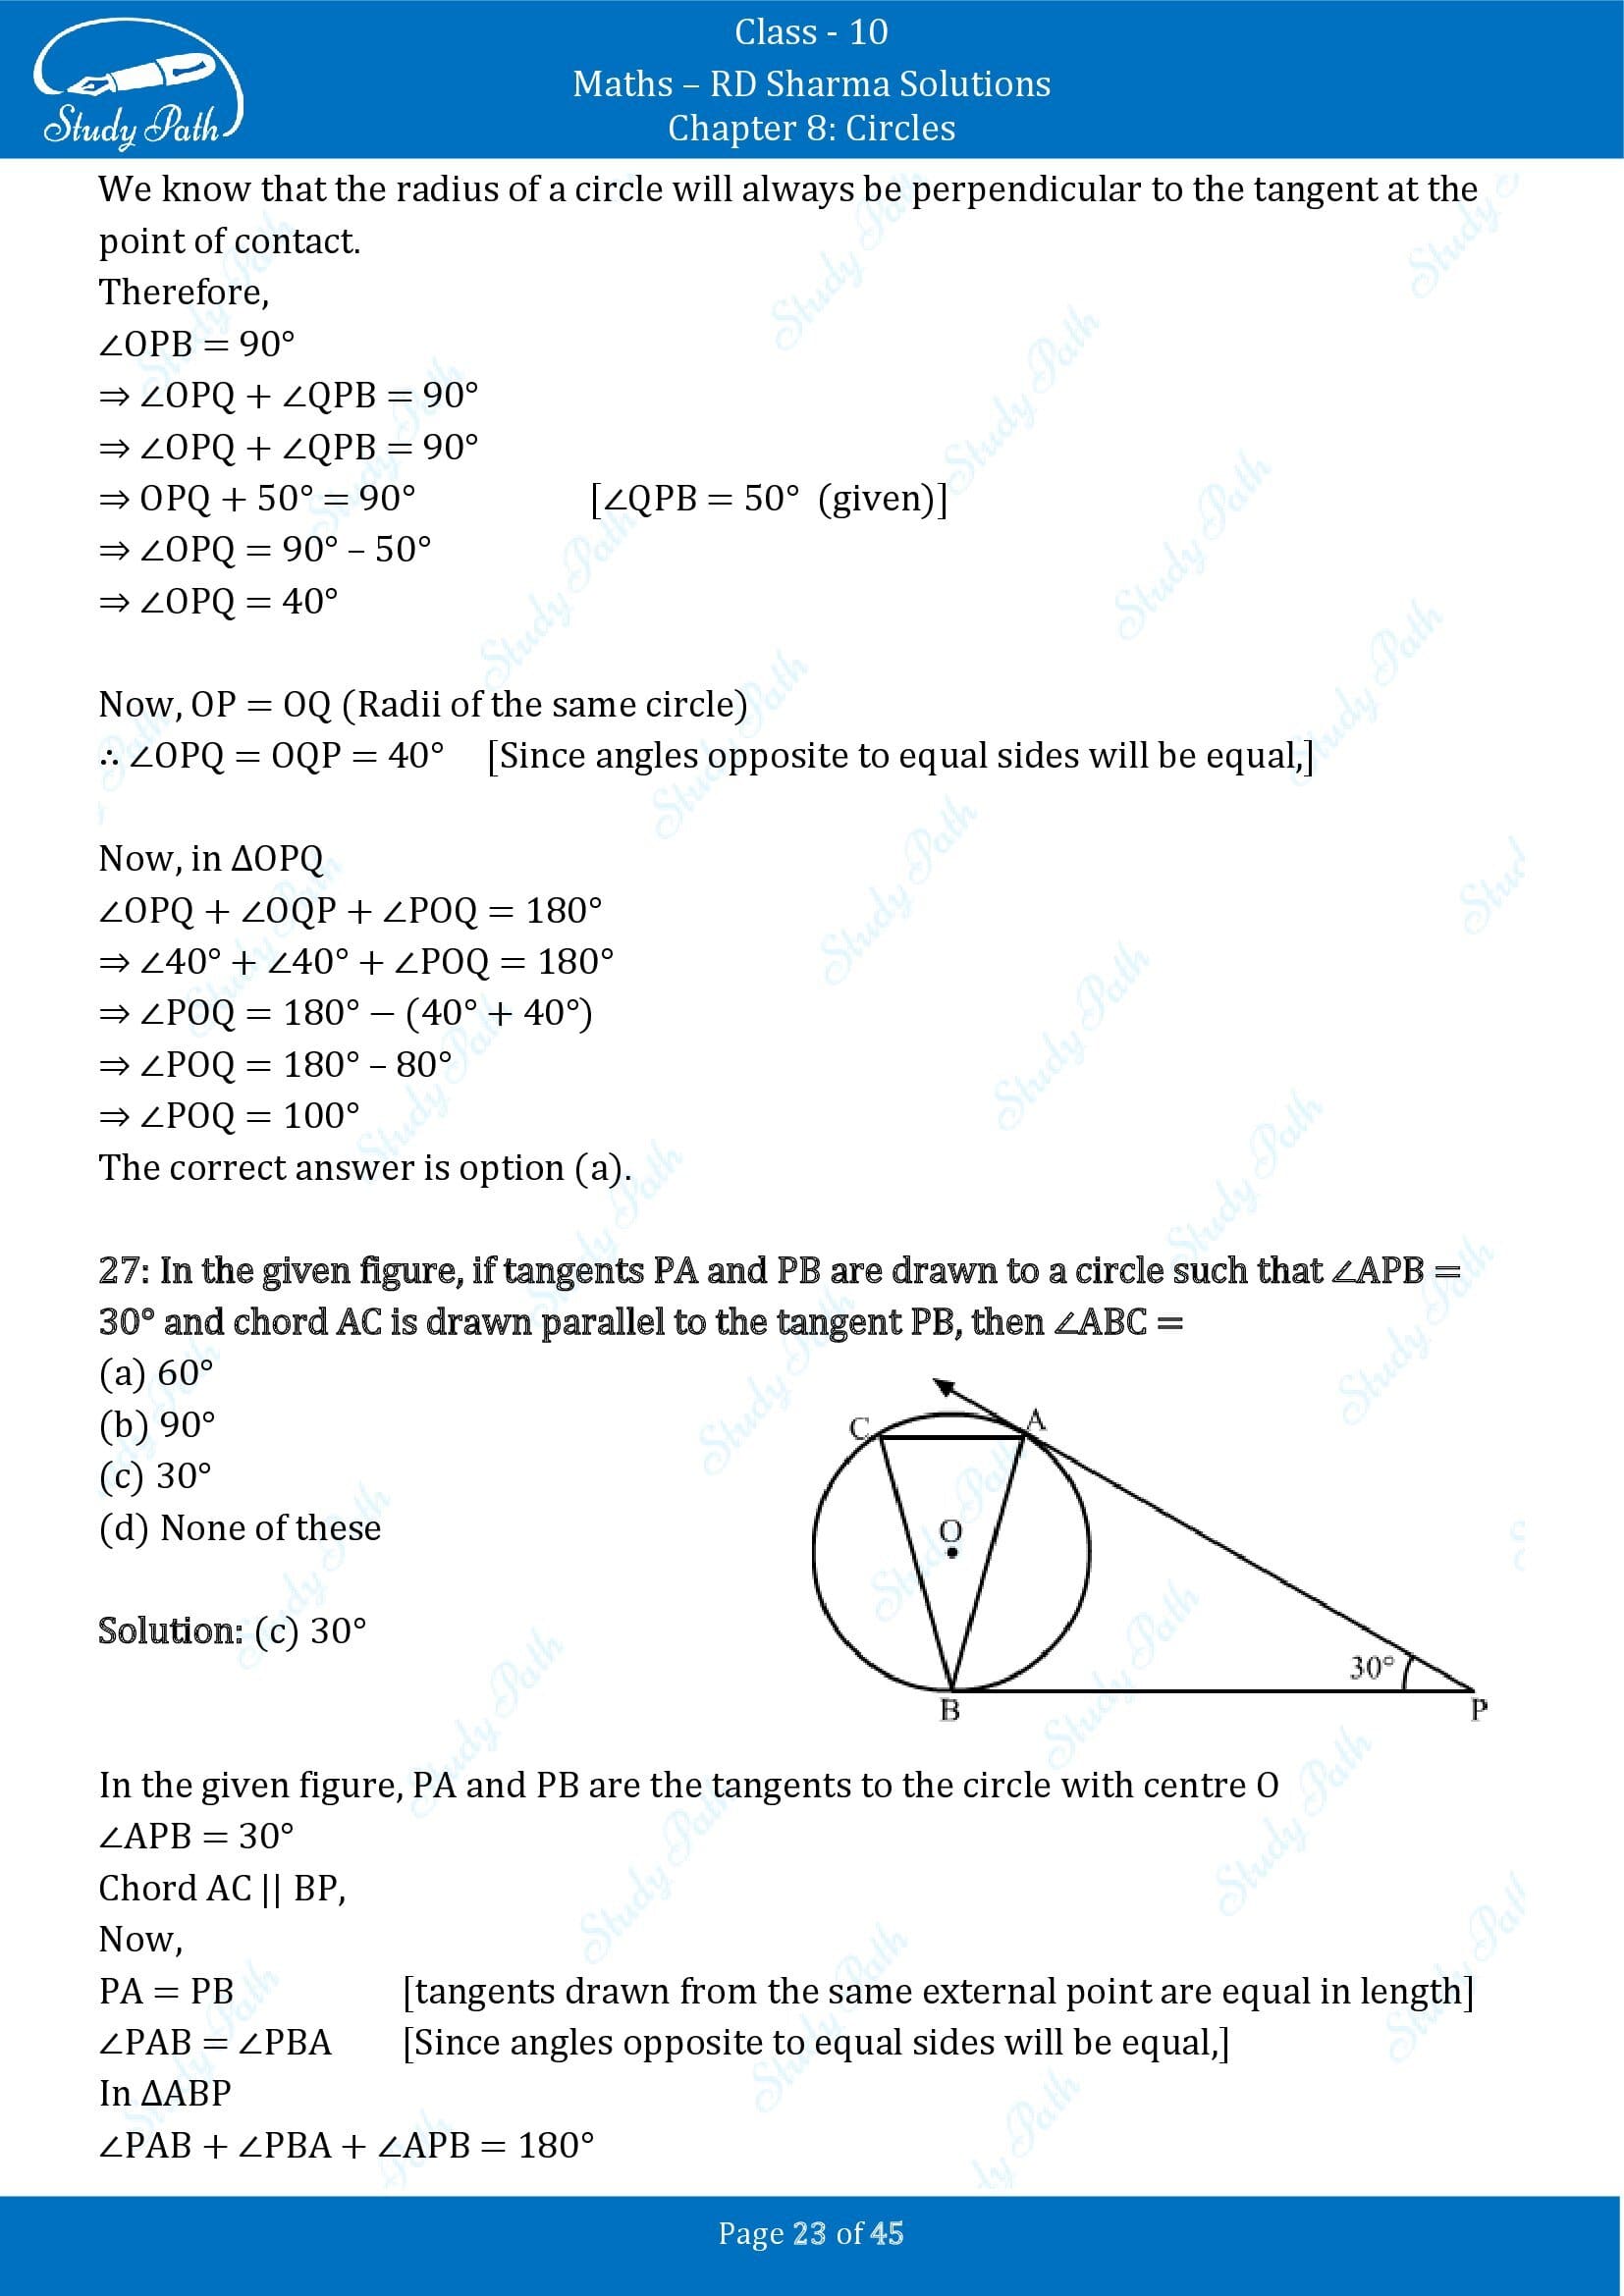 RD Sharma Solutions Class 10 Chapter 8 Circles Multiple Choice Questions MCQs 00023